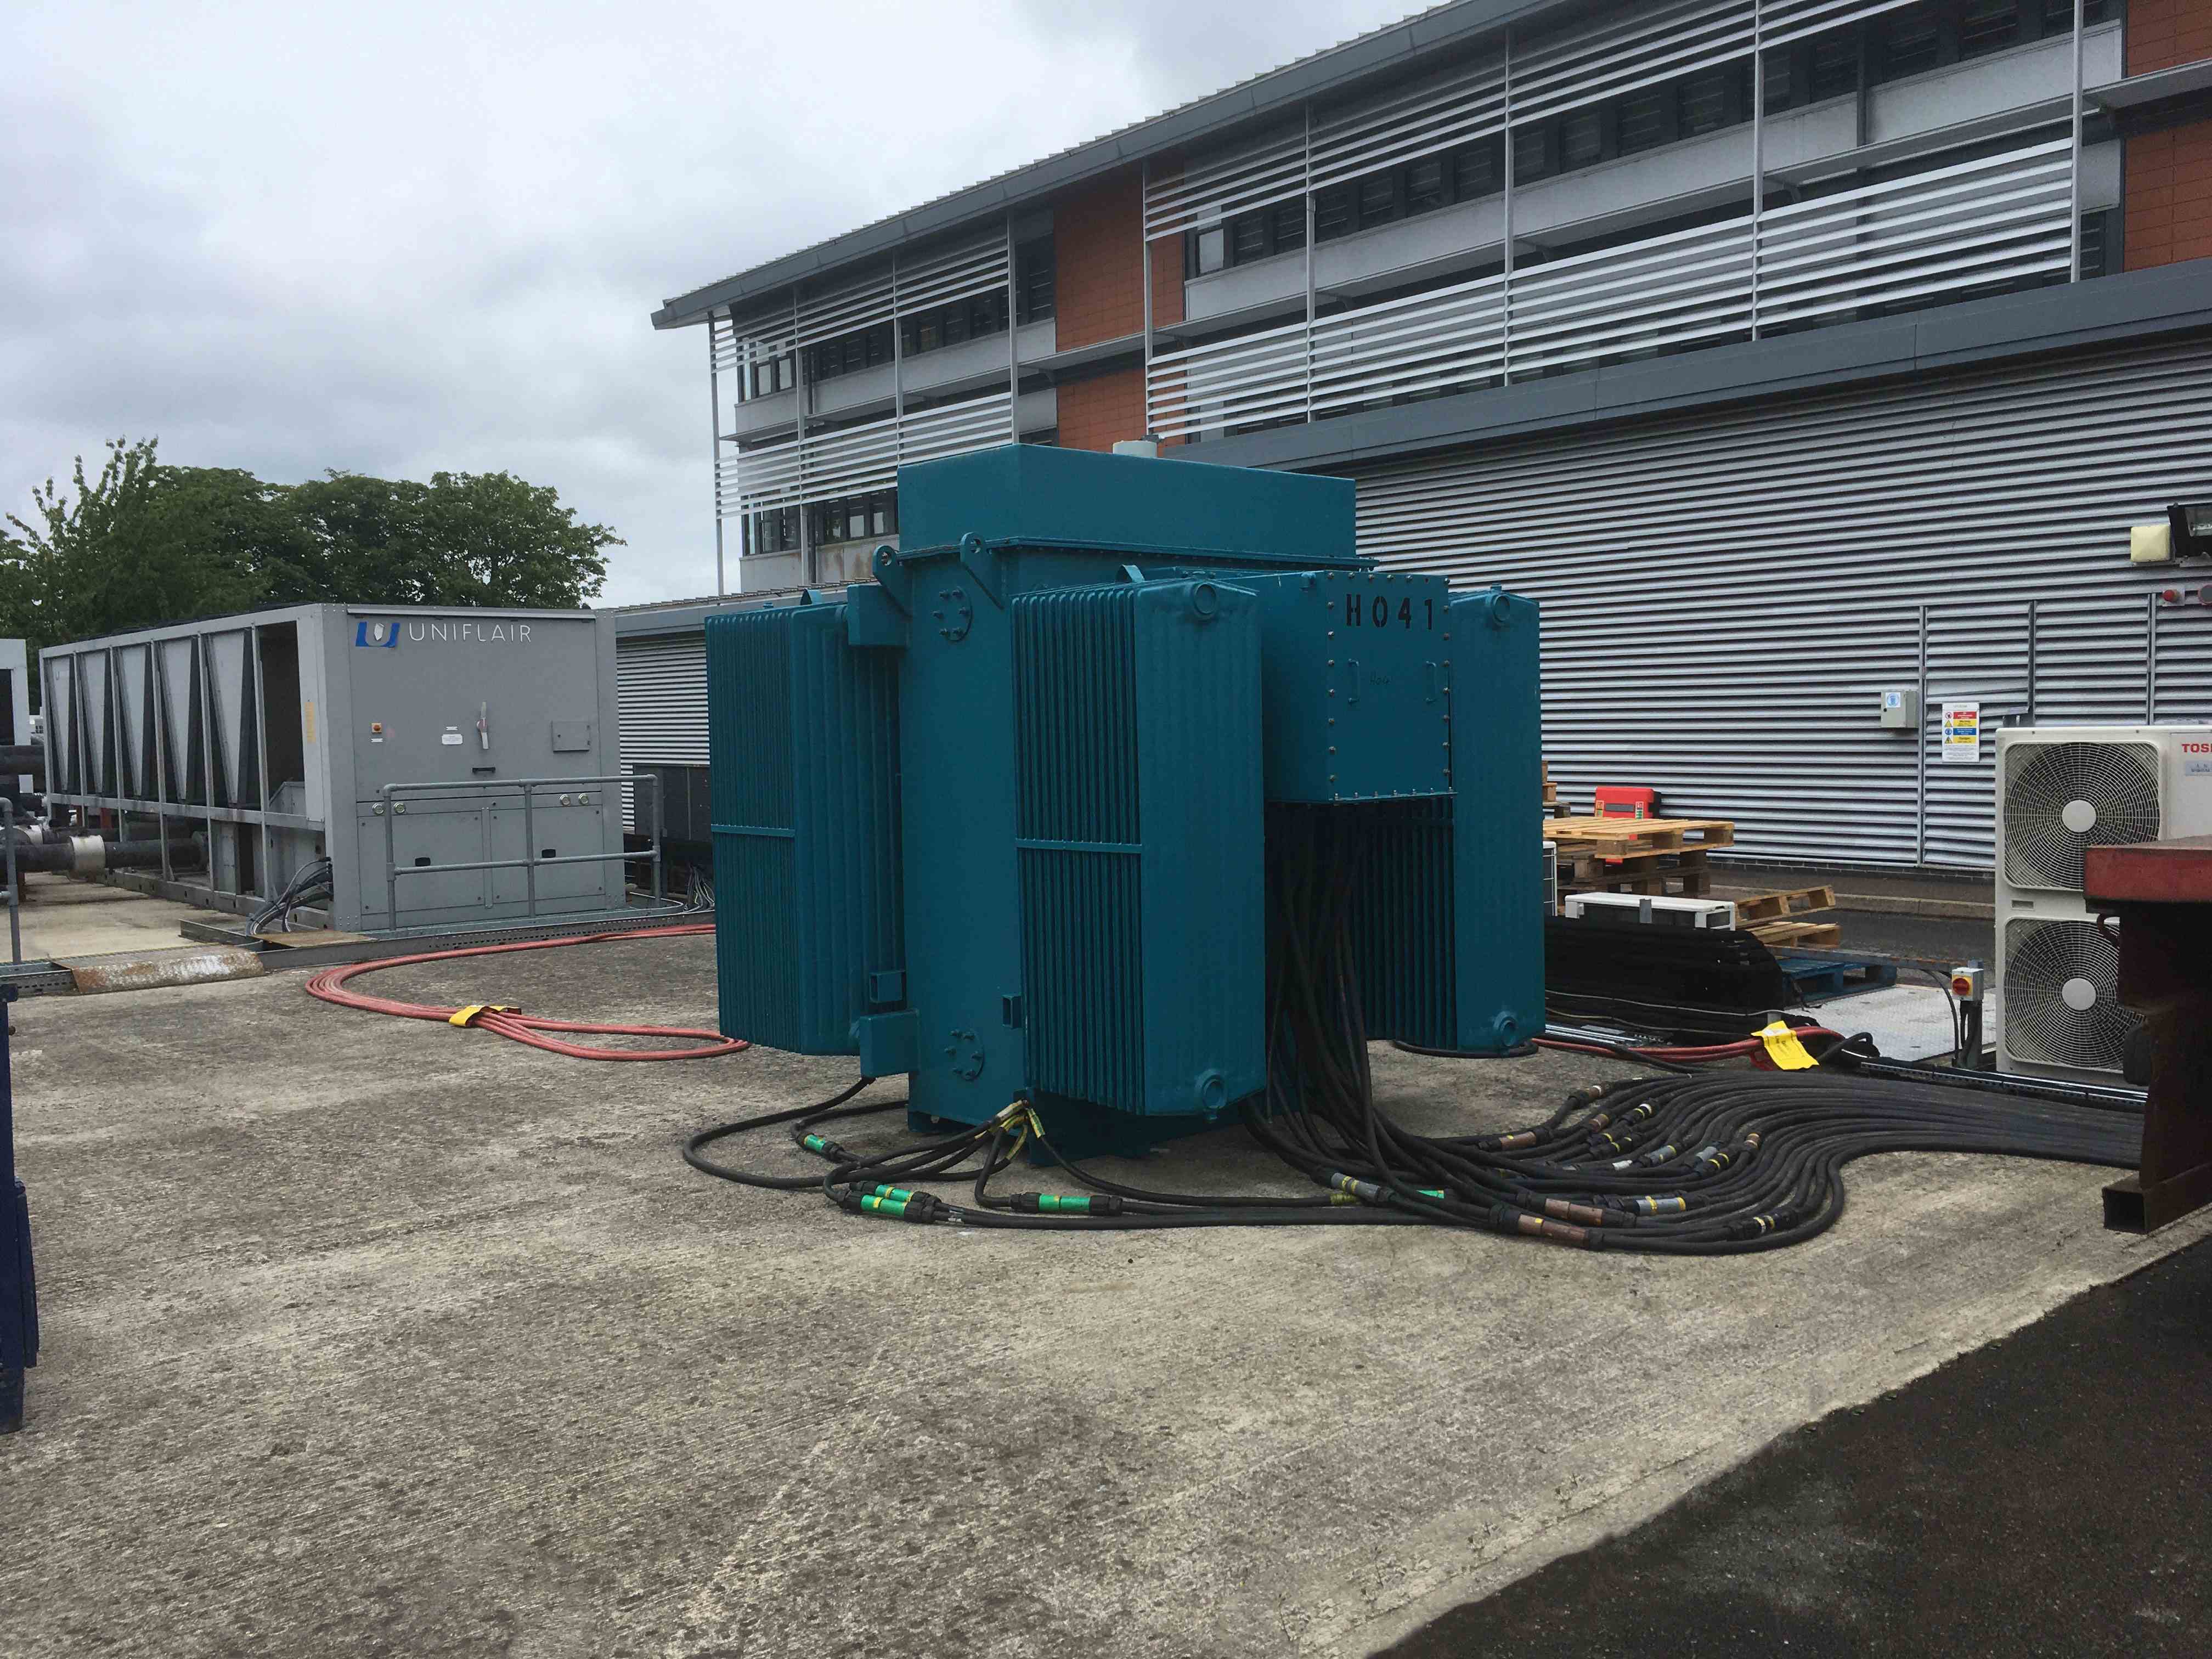 Transformer connected to generators